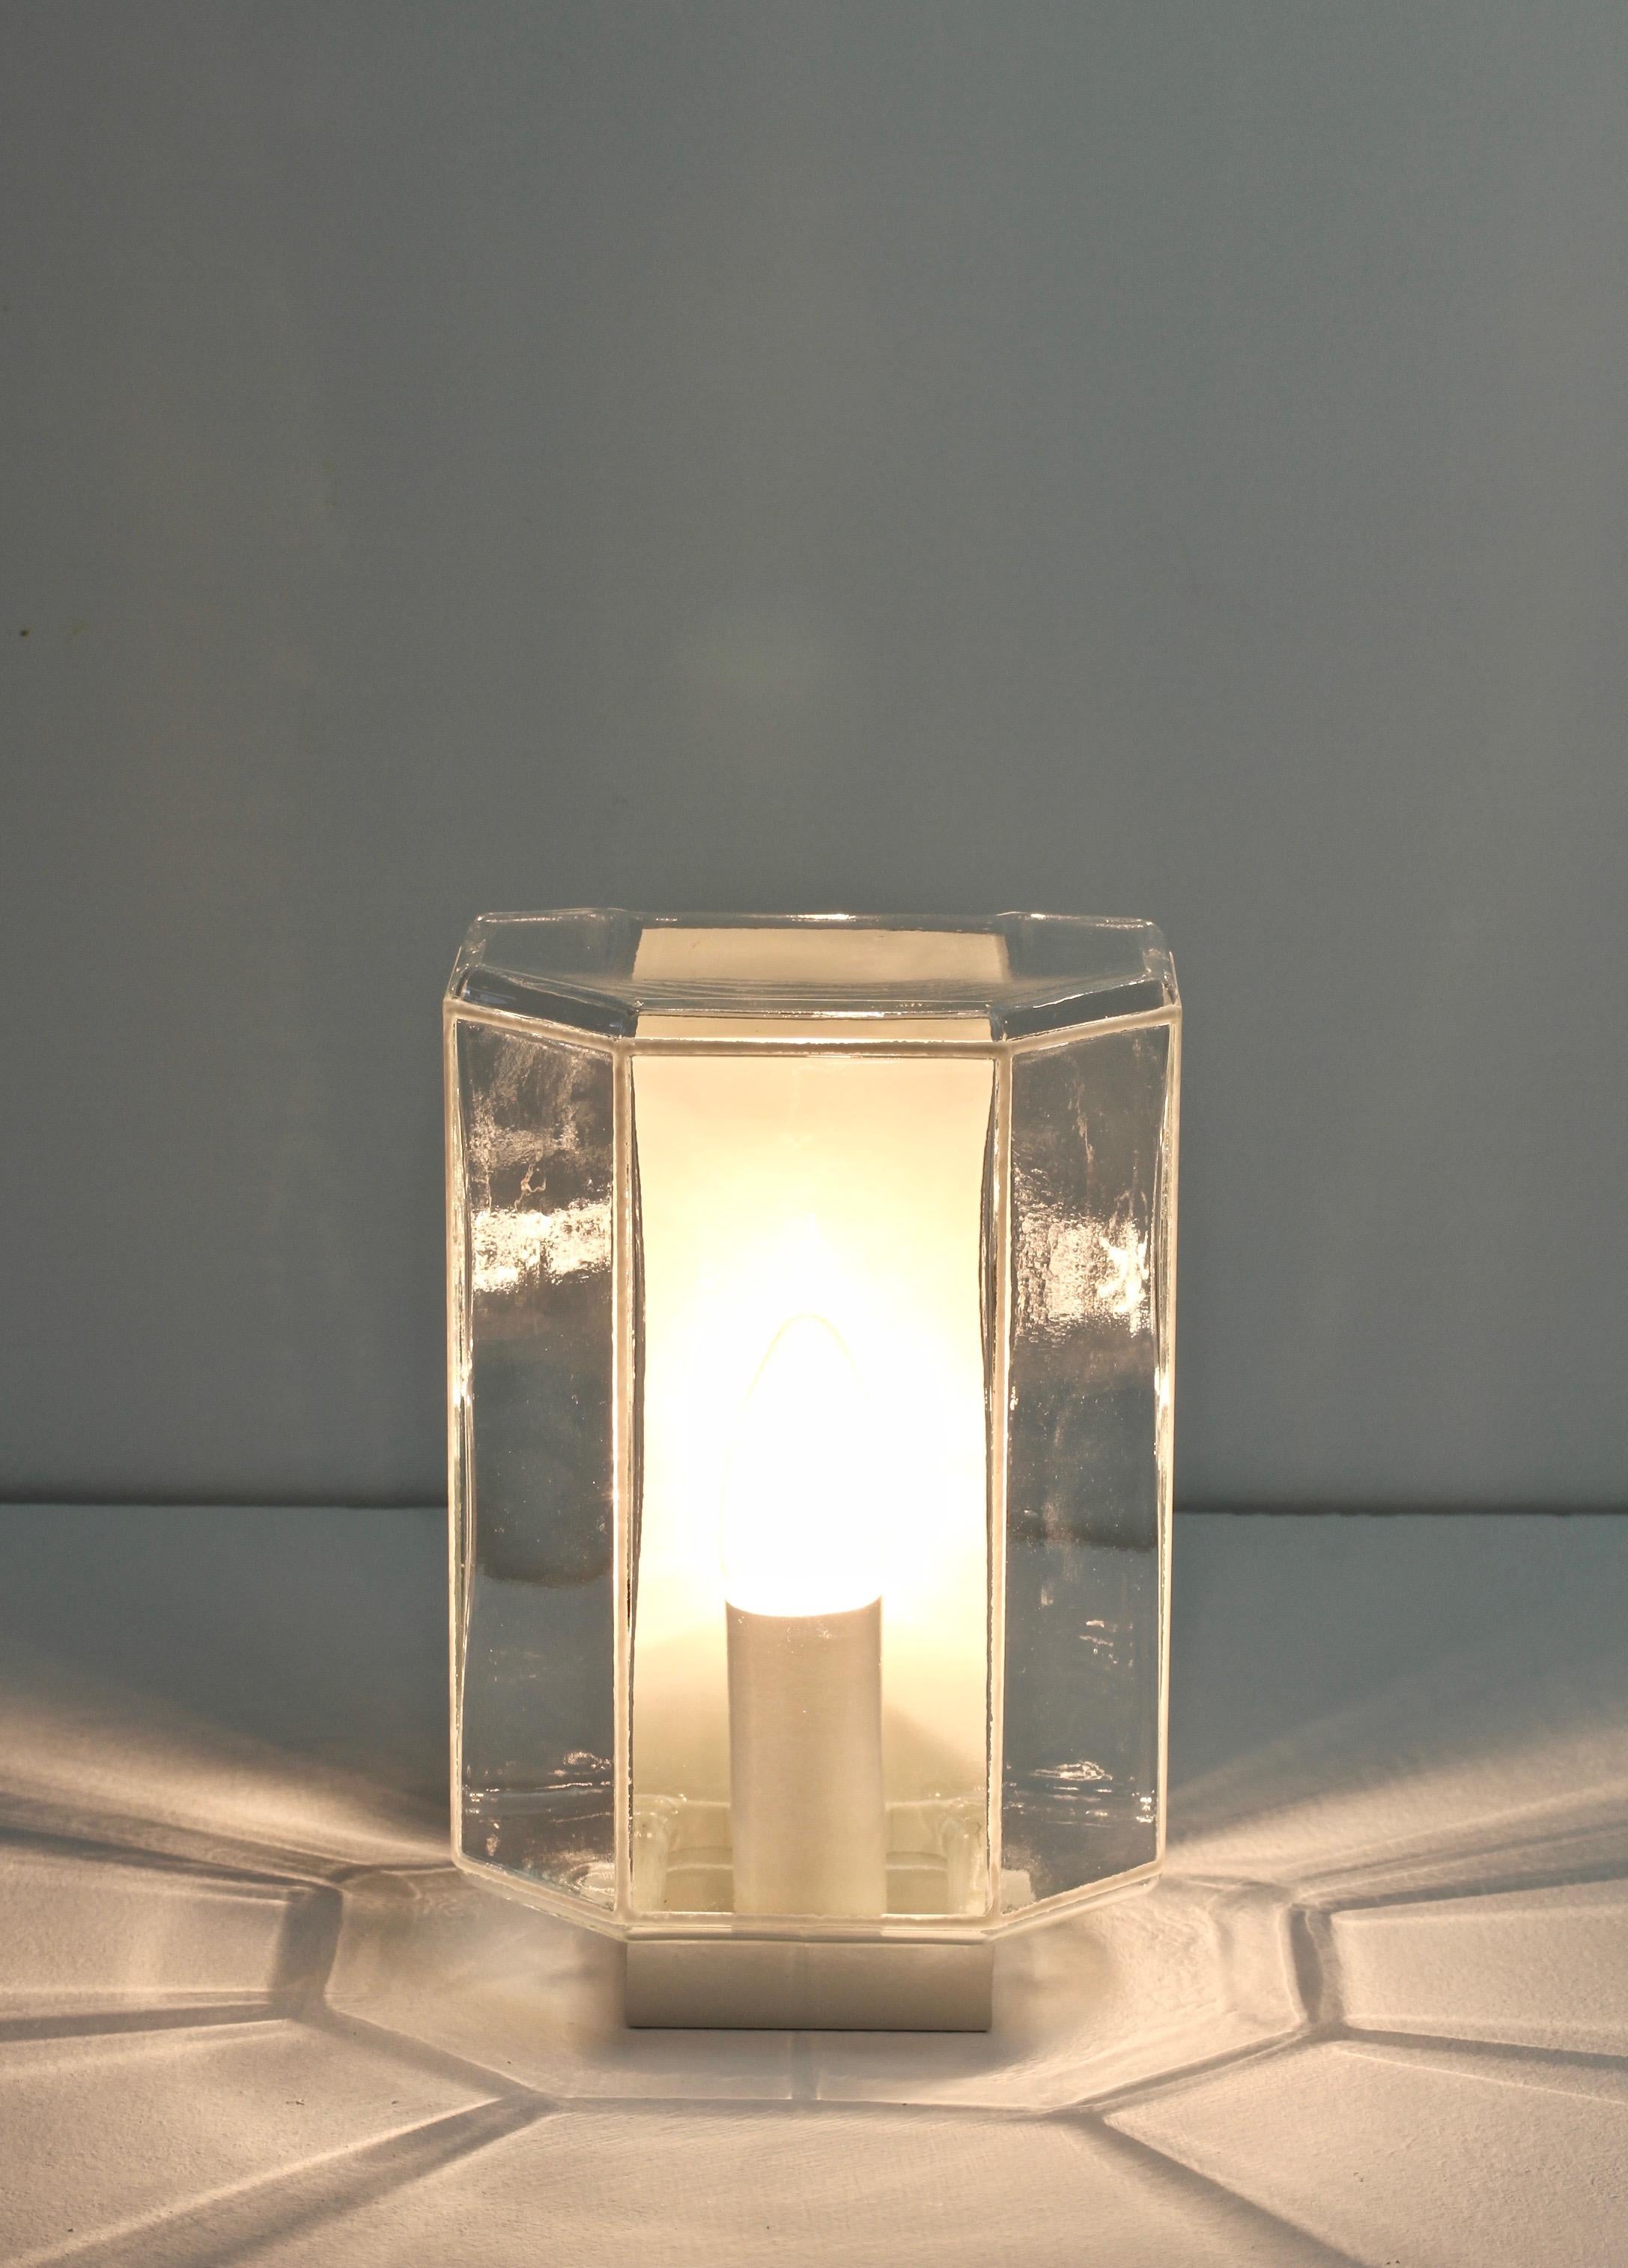 1 of 3 1970s Minimalist White and Clear Glass Wall Lights by Glashütte Limburg  (Metall)